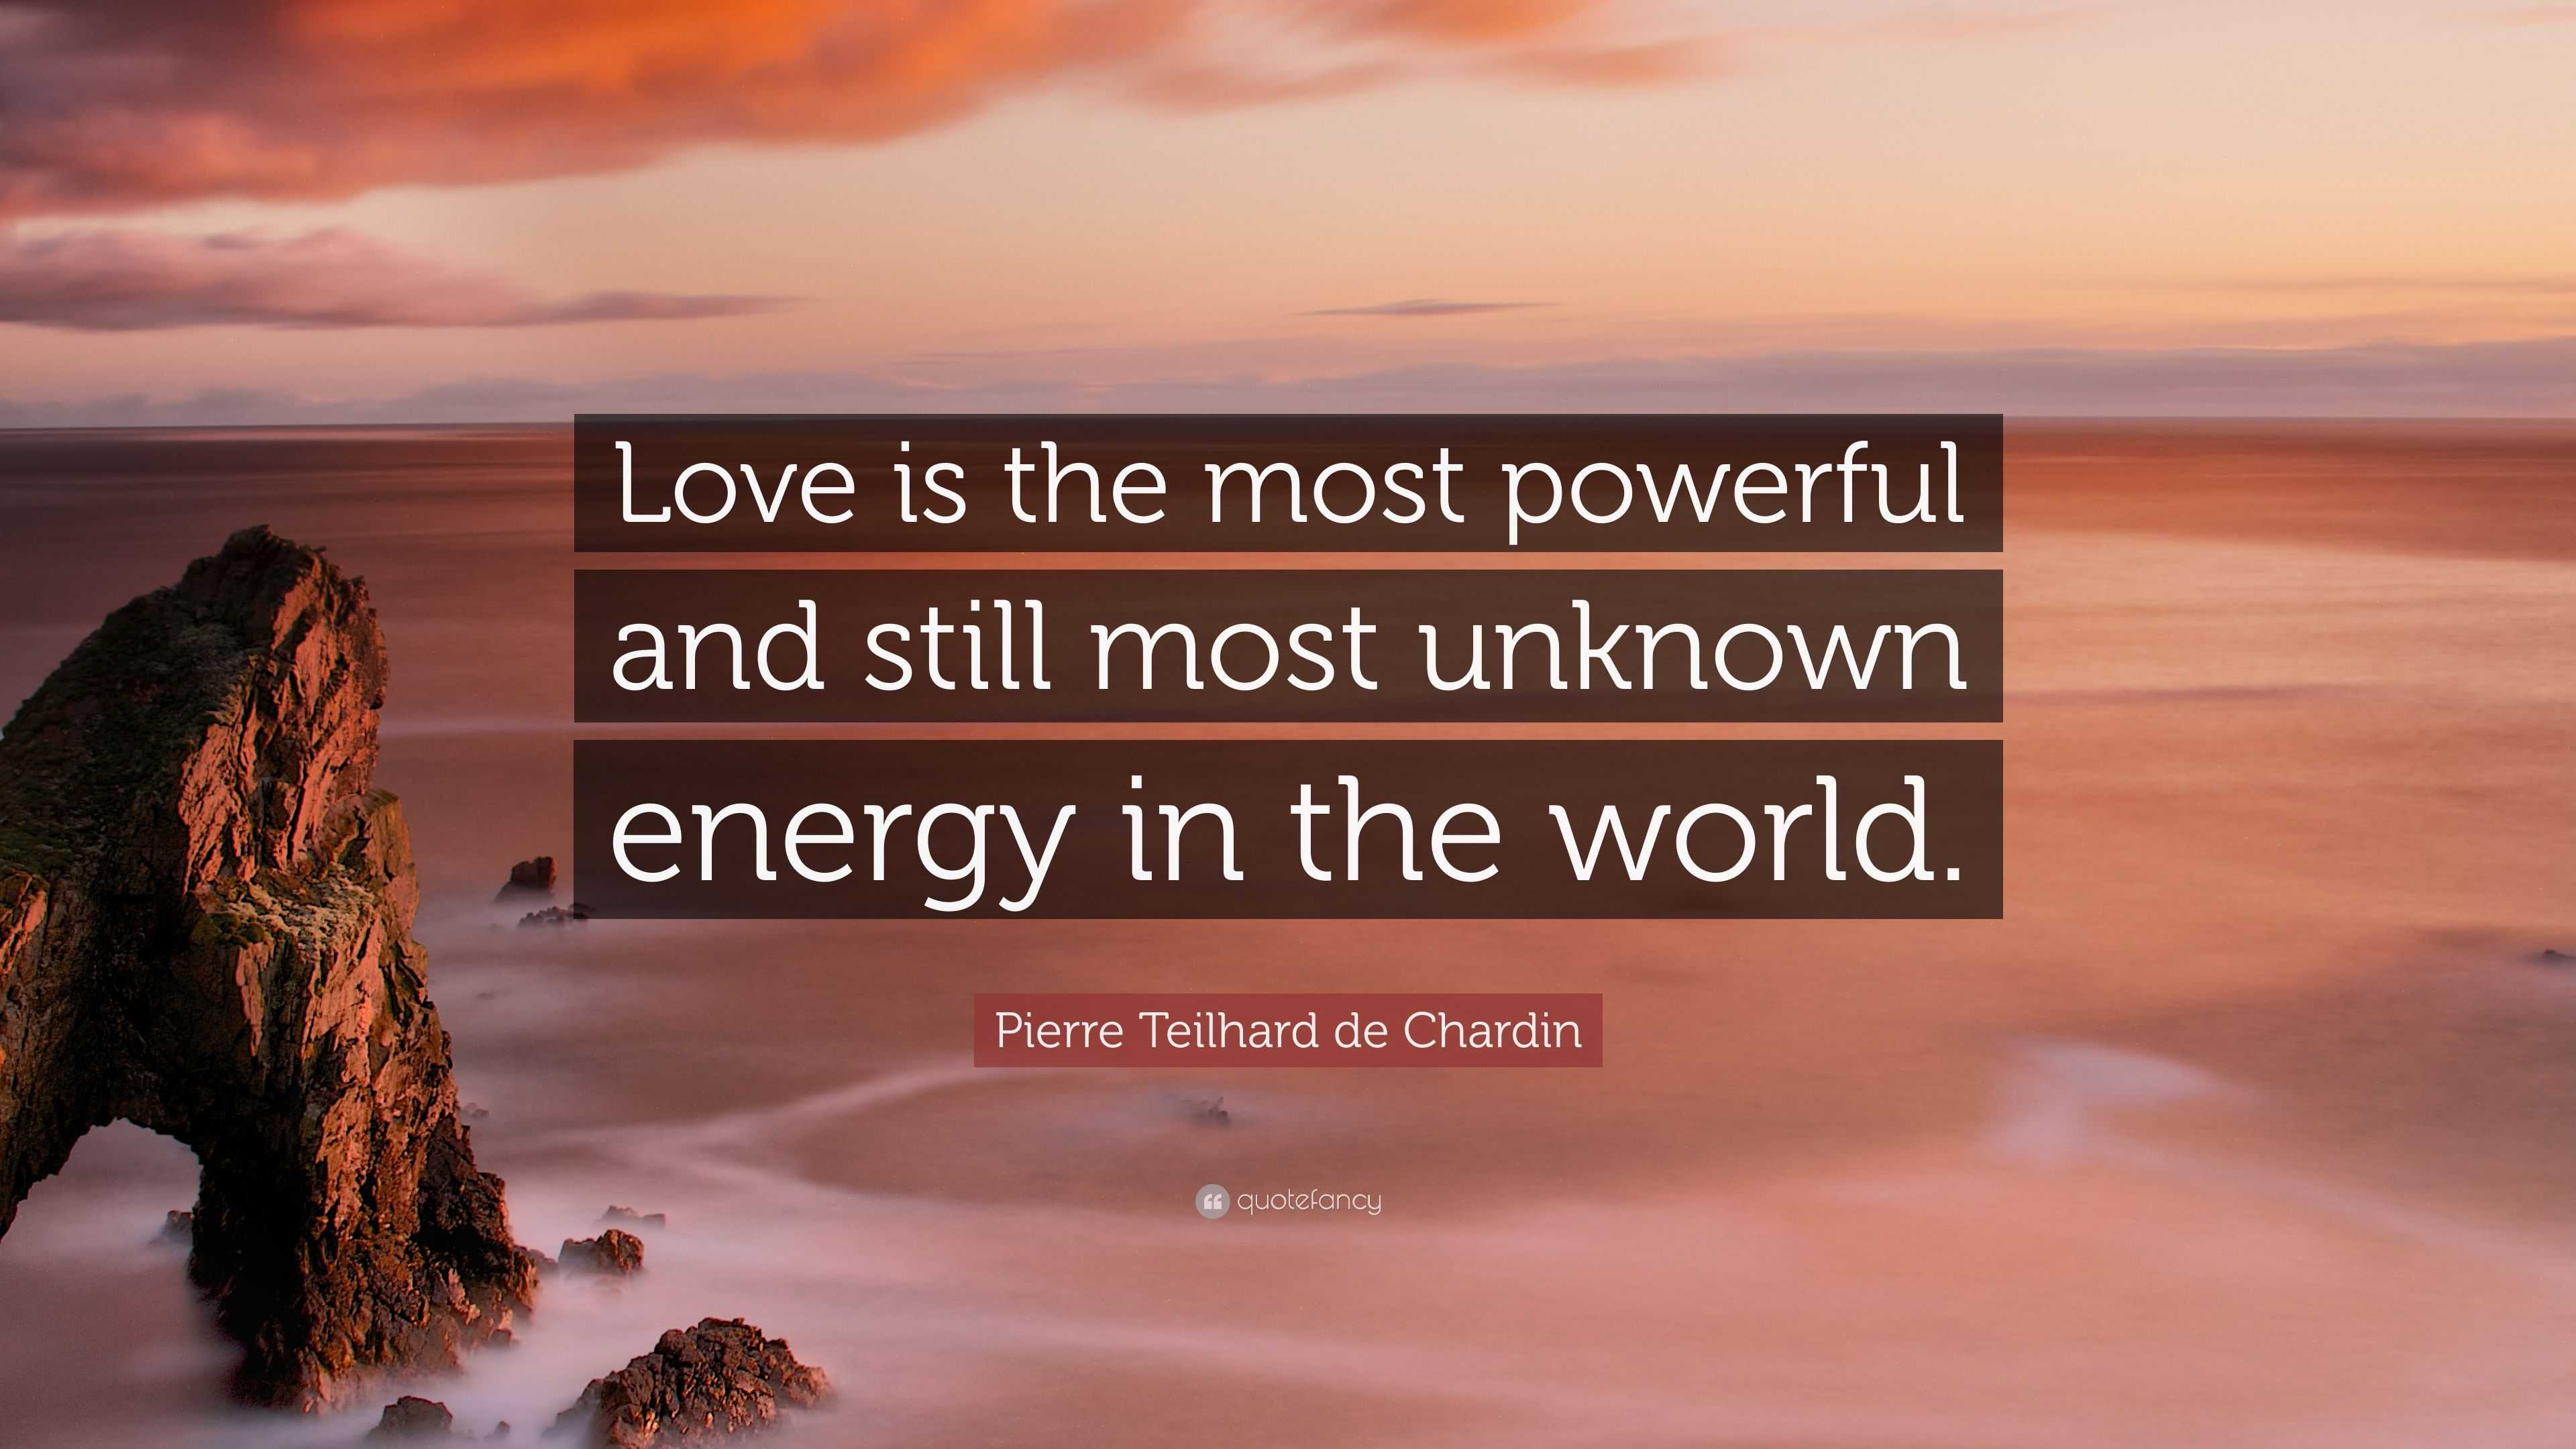 Pierre Teilhard de Chardin Quote: "Love is the most powerful and still most unknown energy in ...